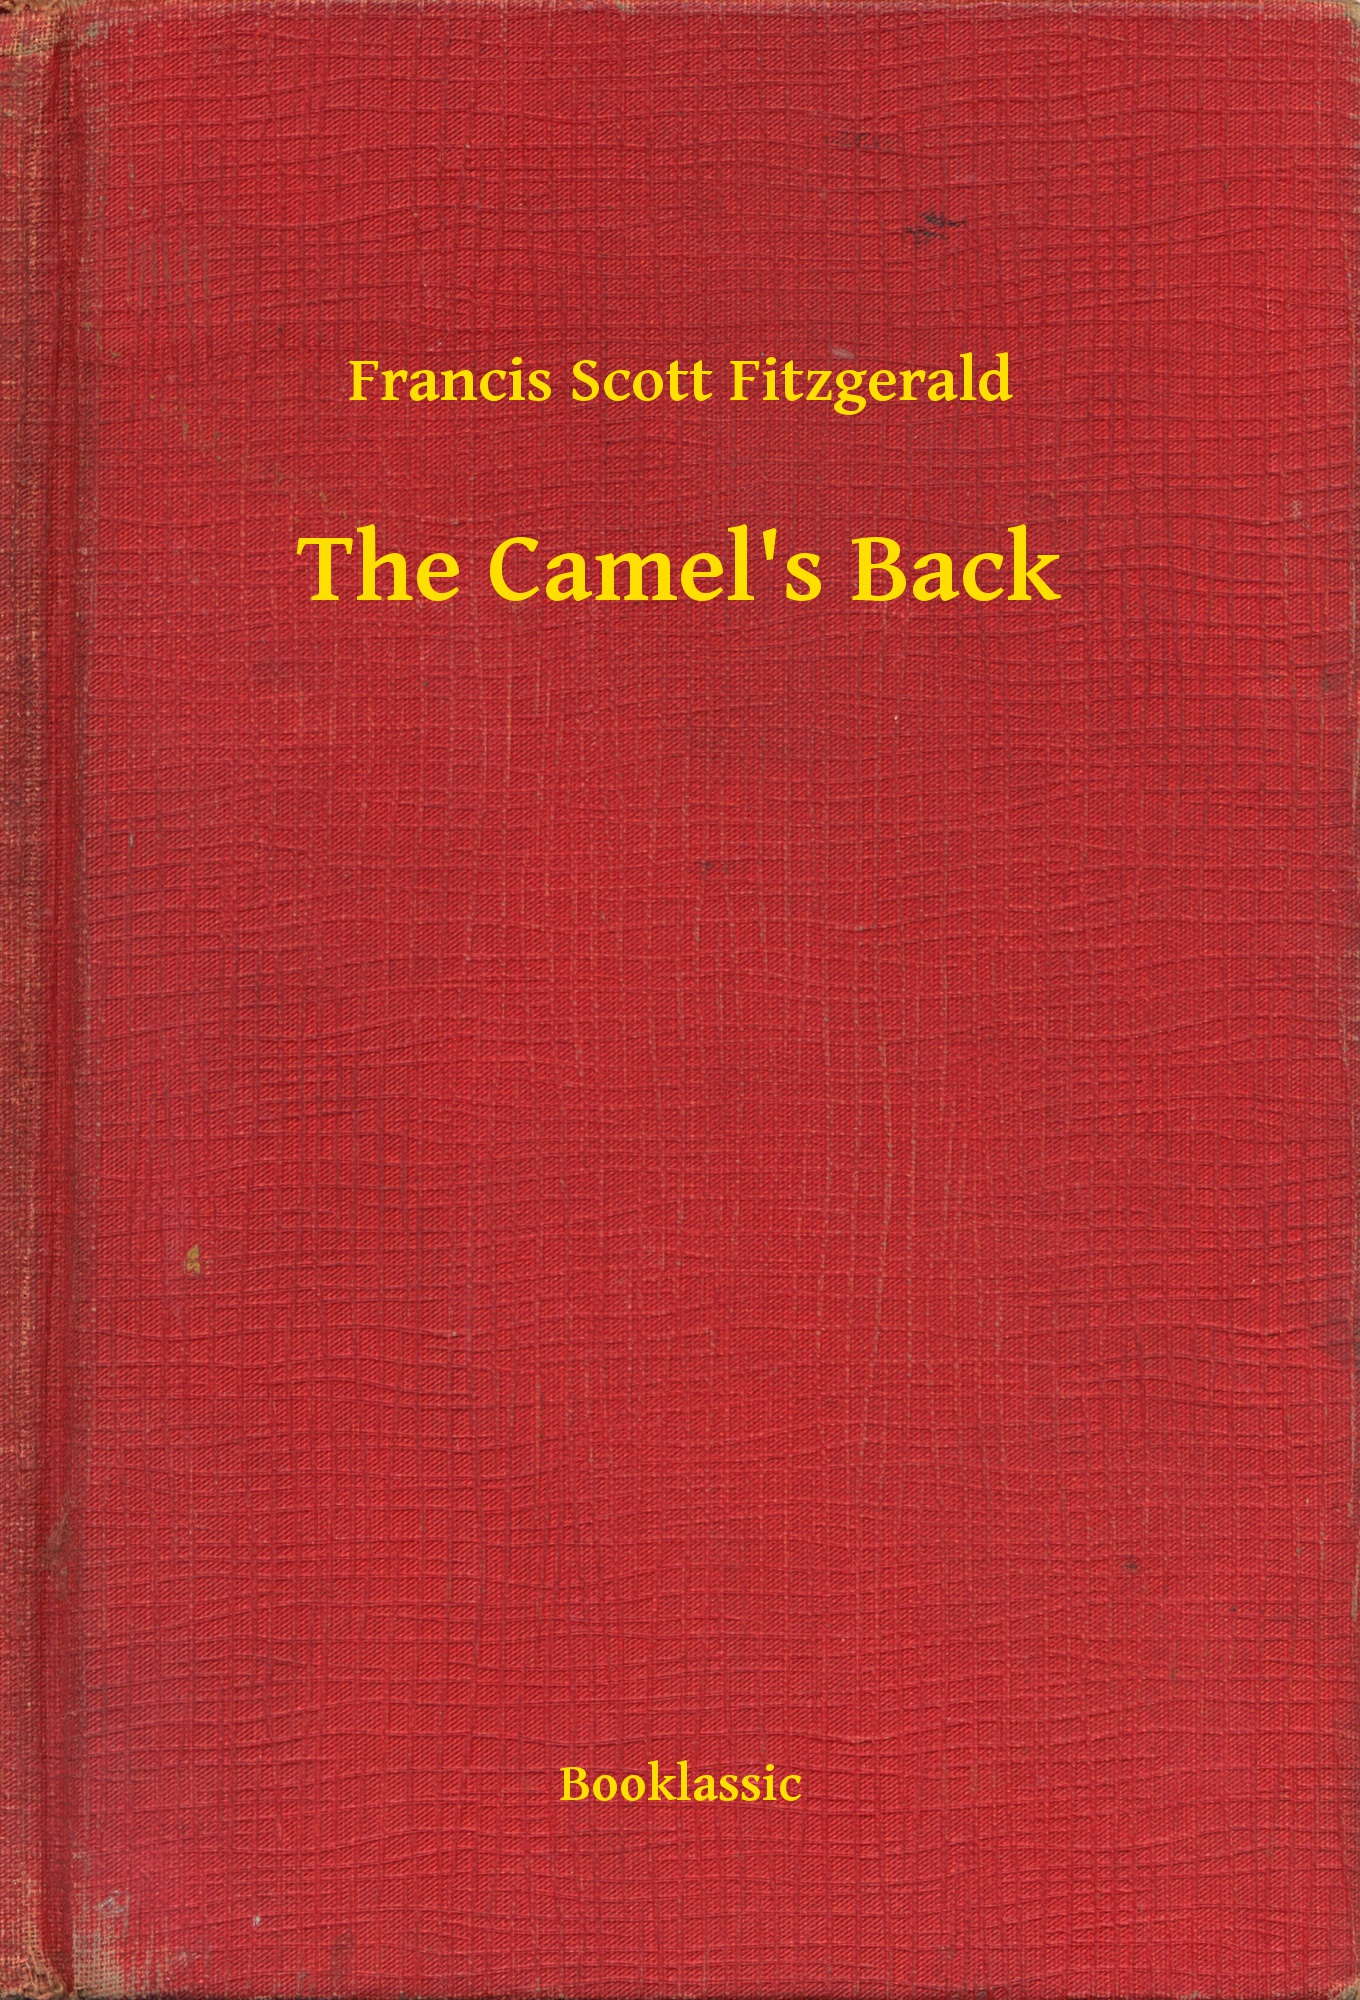 The Camel"s Back